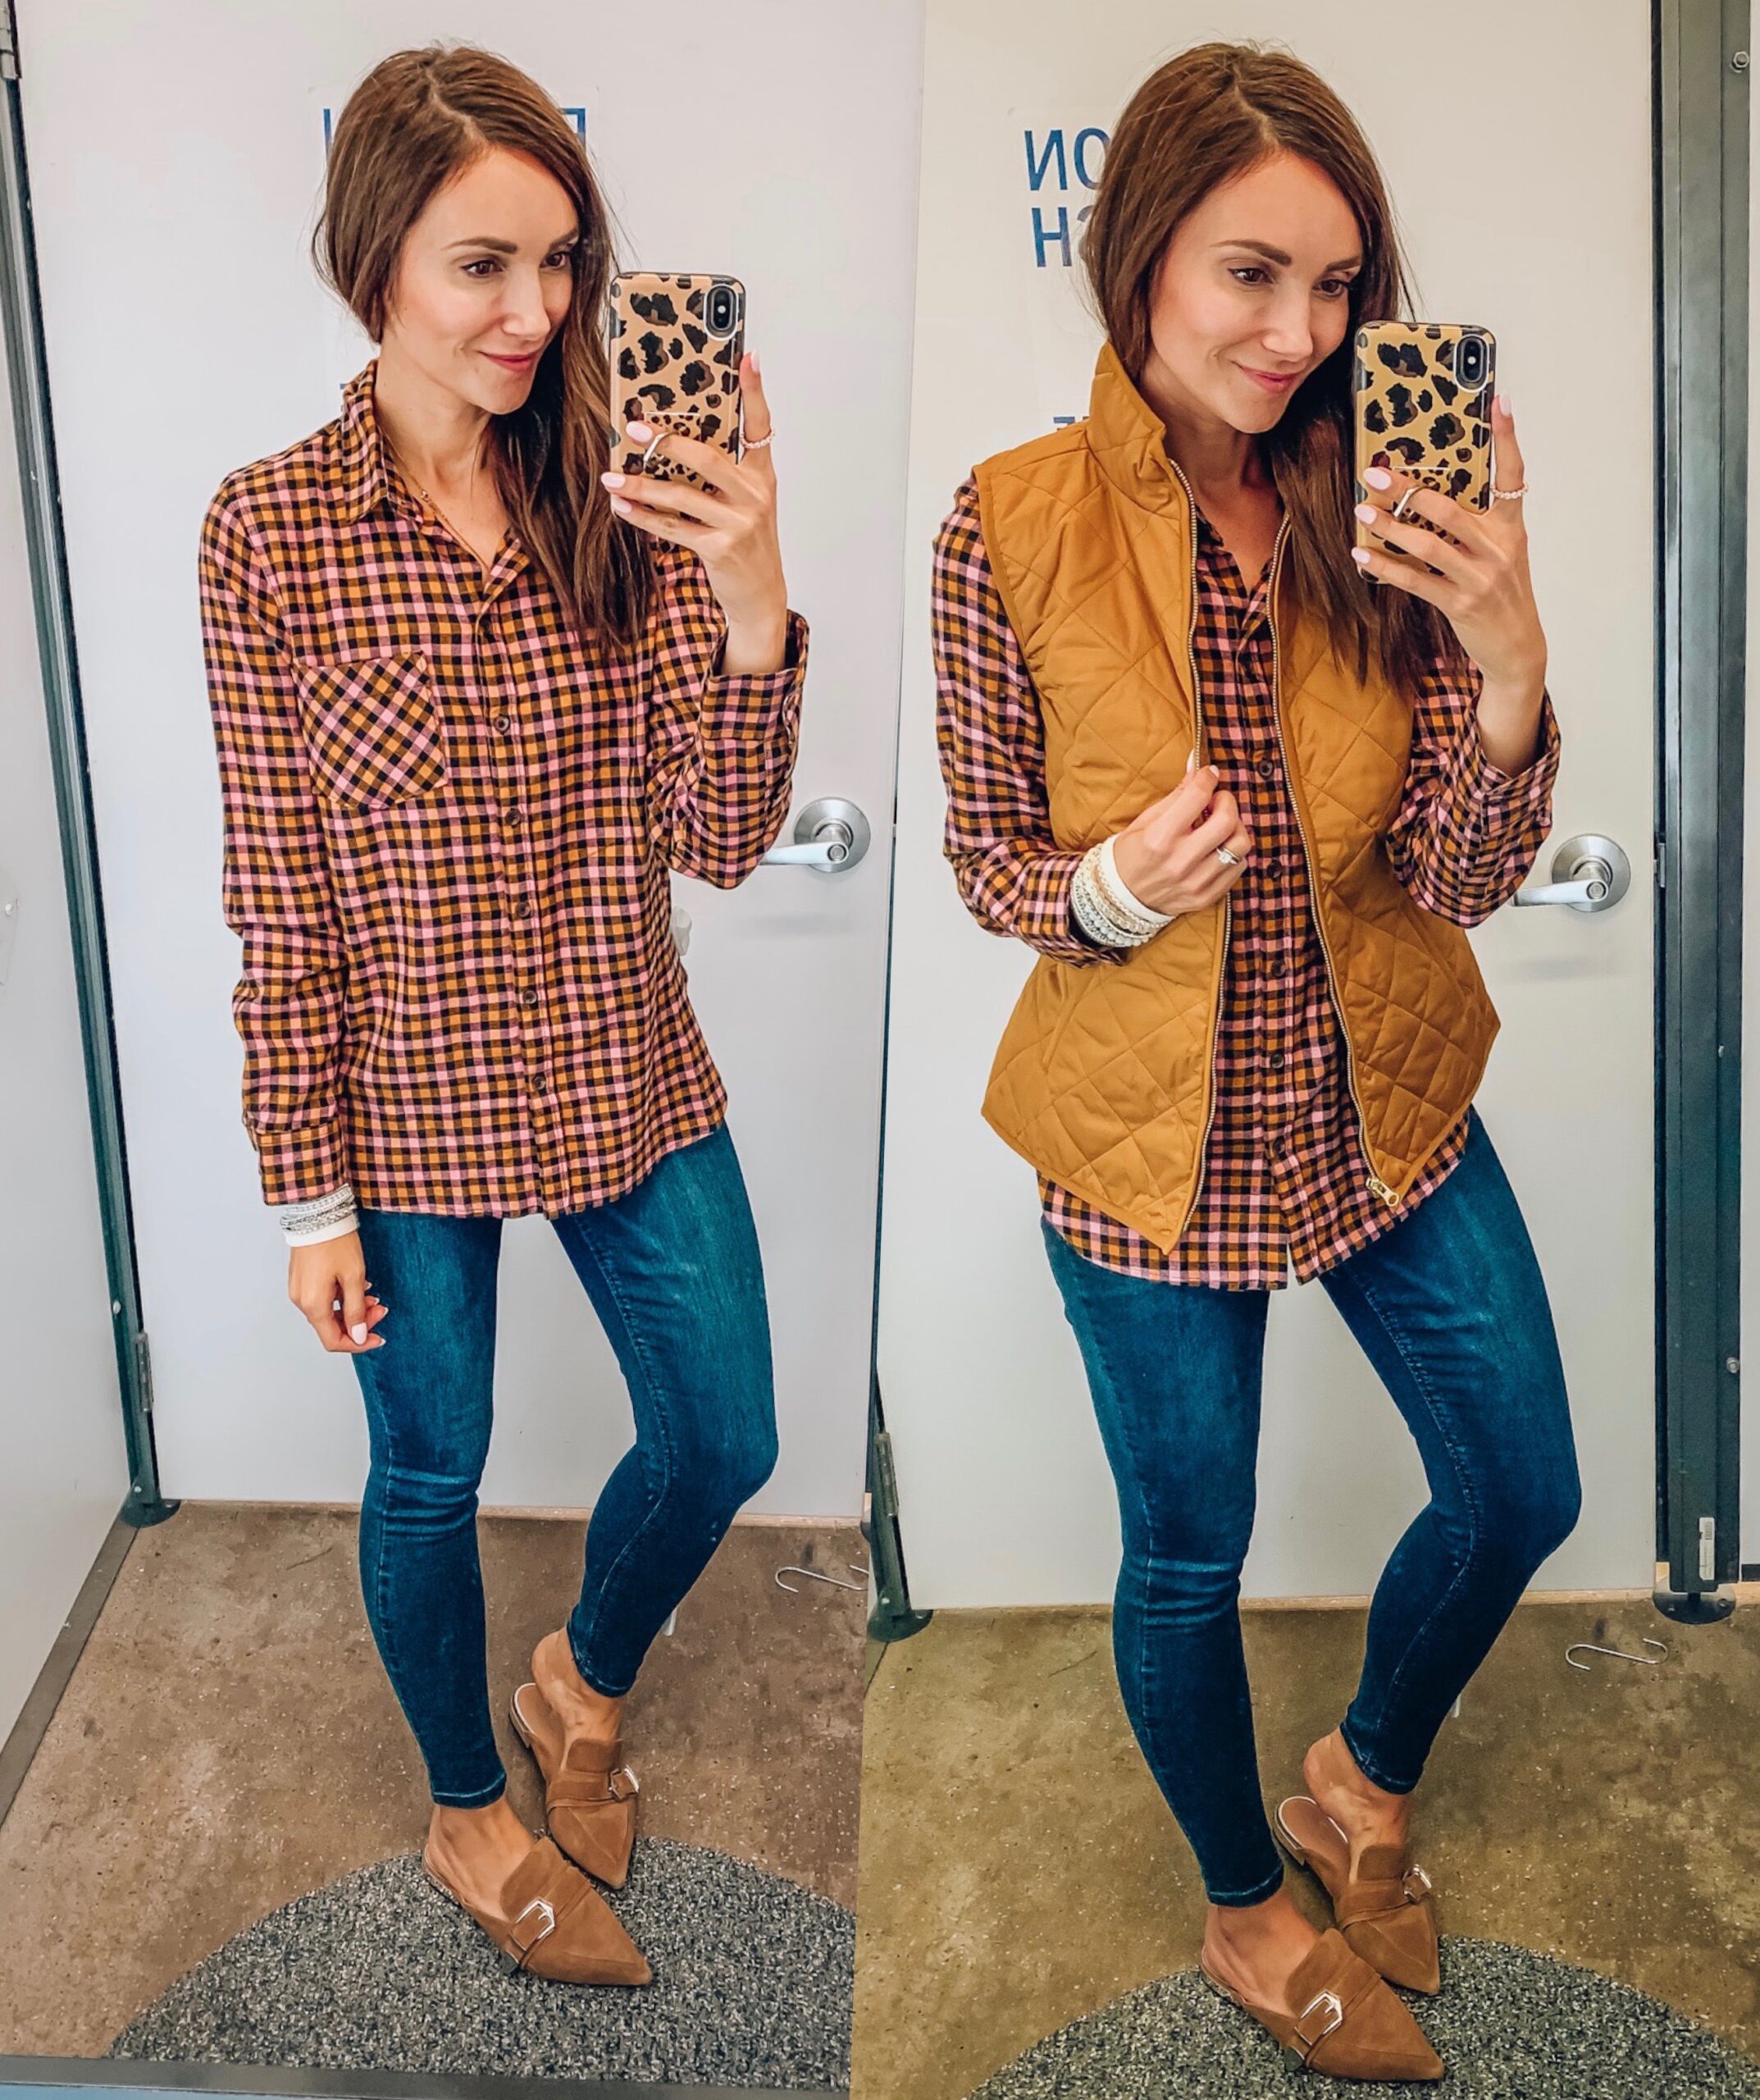 VEST, FLANNEL, JEANS, FALL OUTFIT